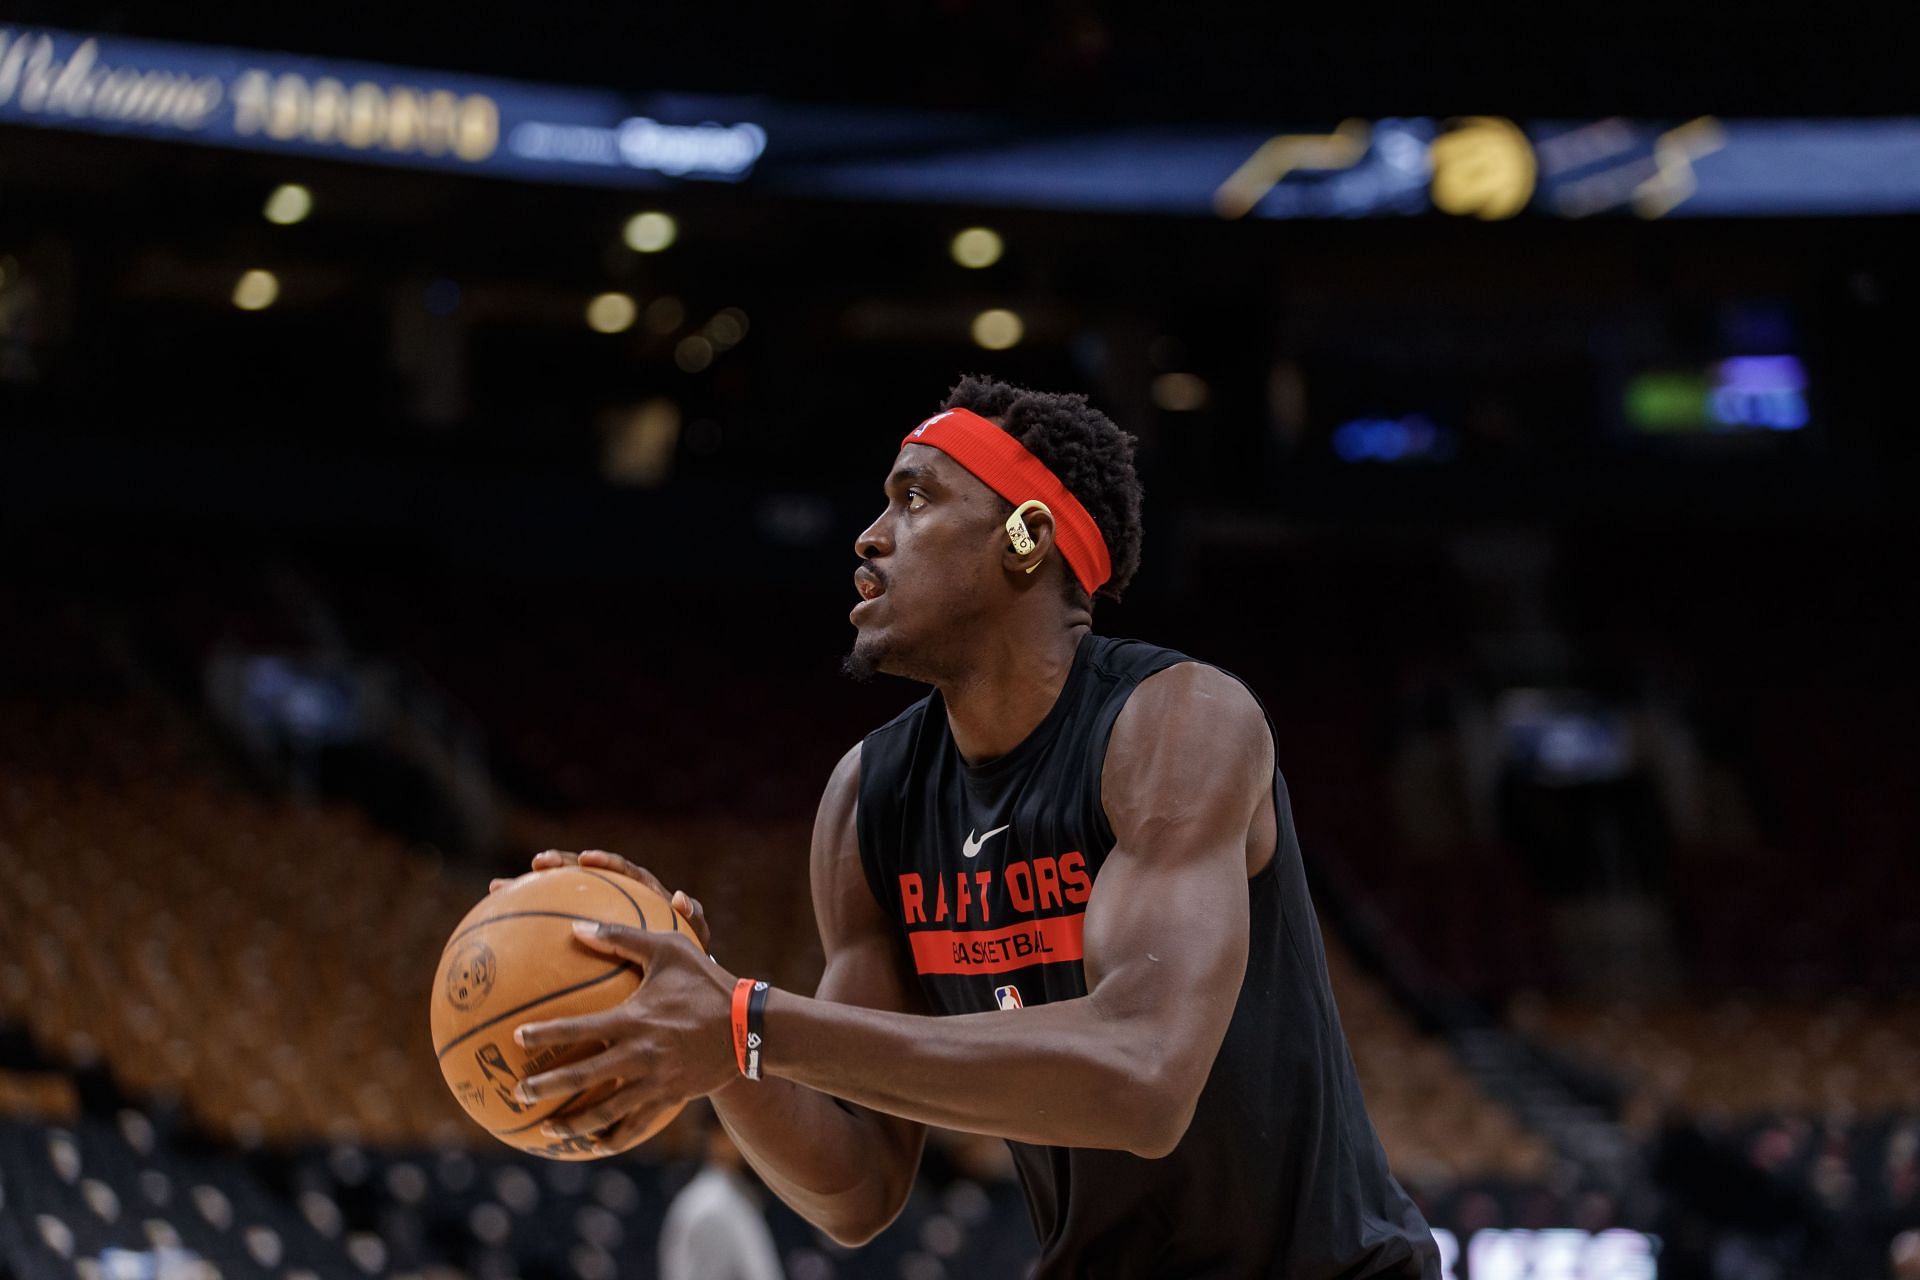 Pascal Siakam Is A Catalyst for Change